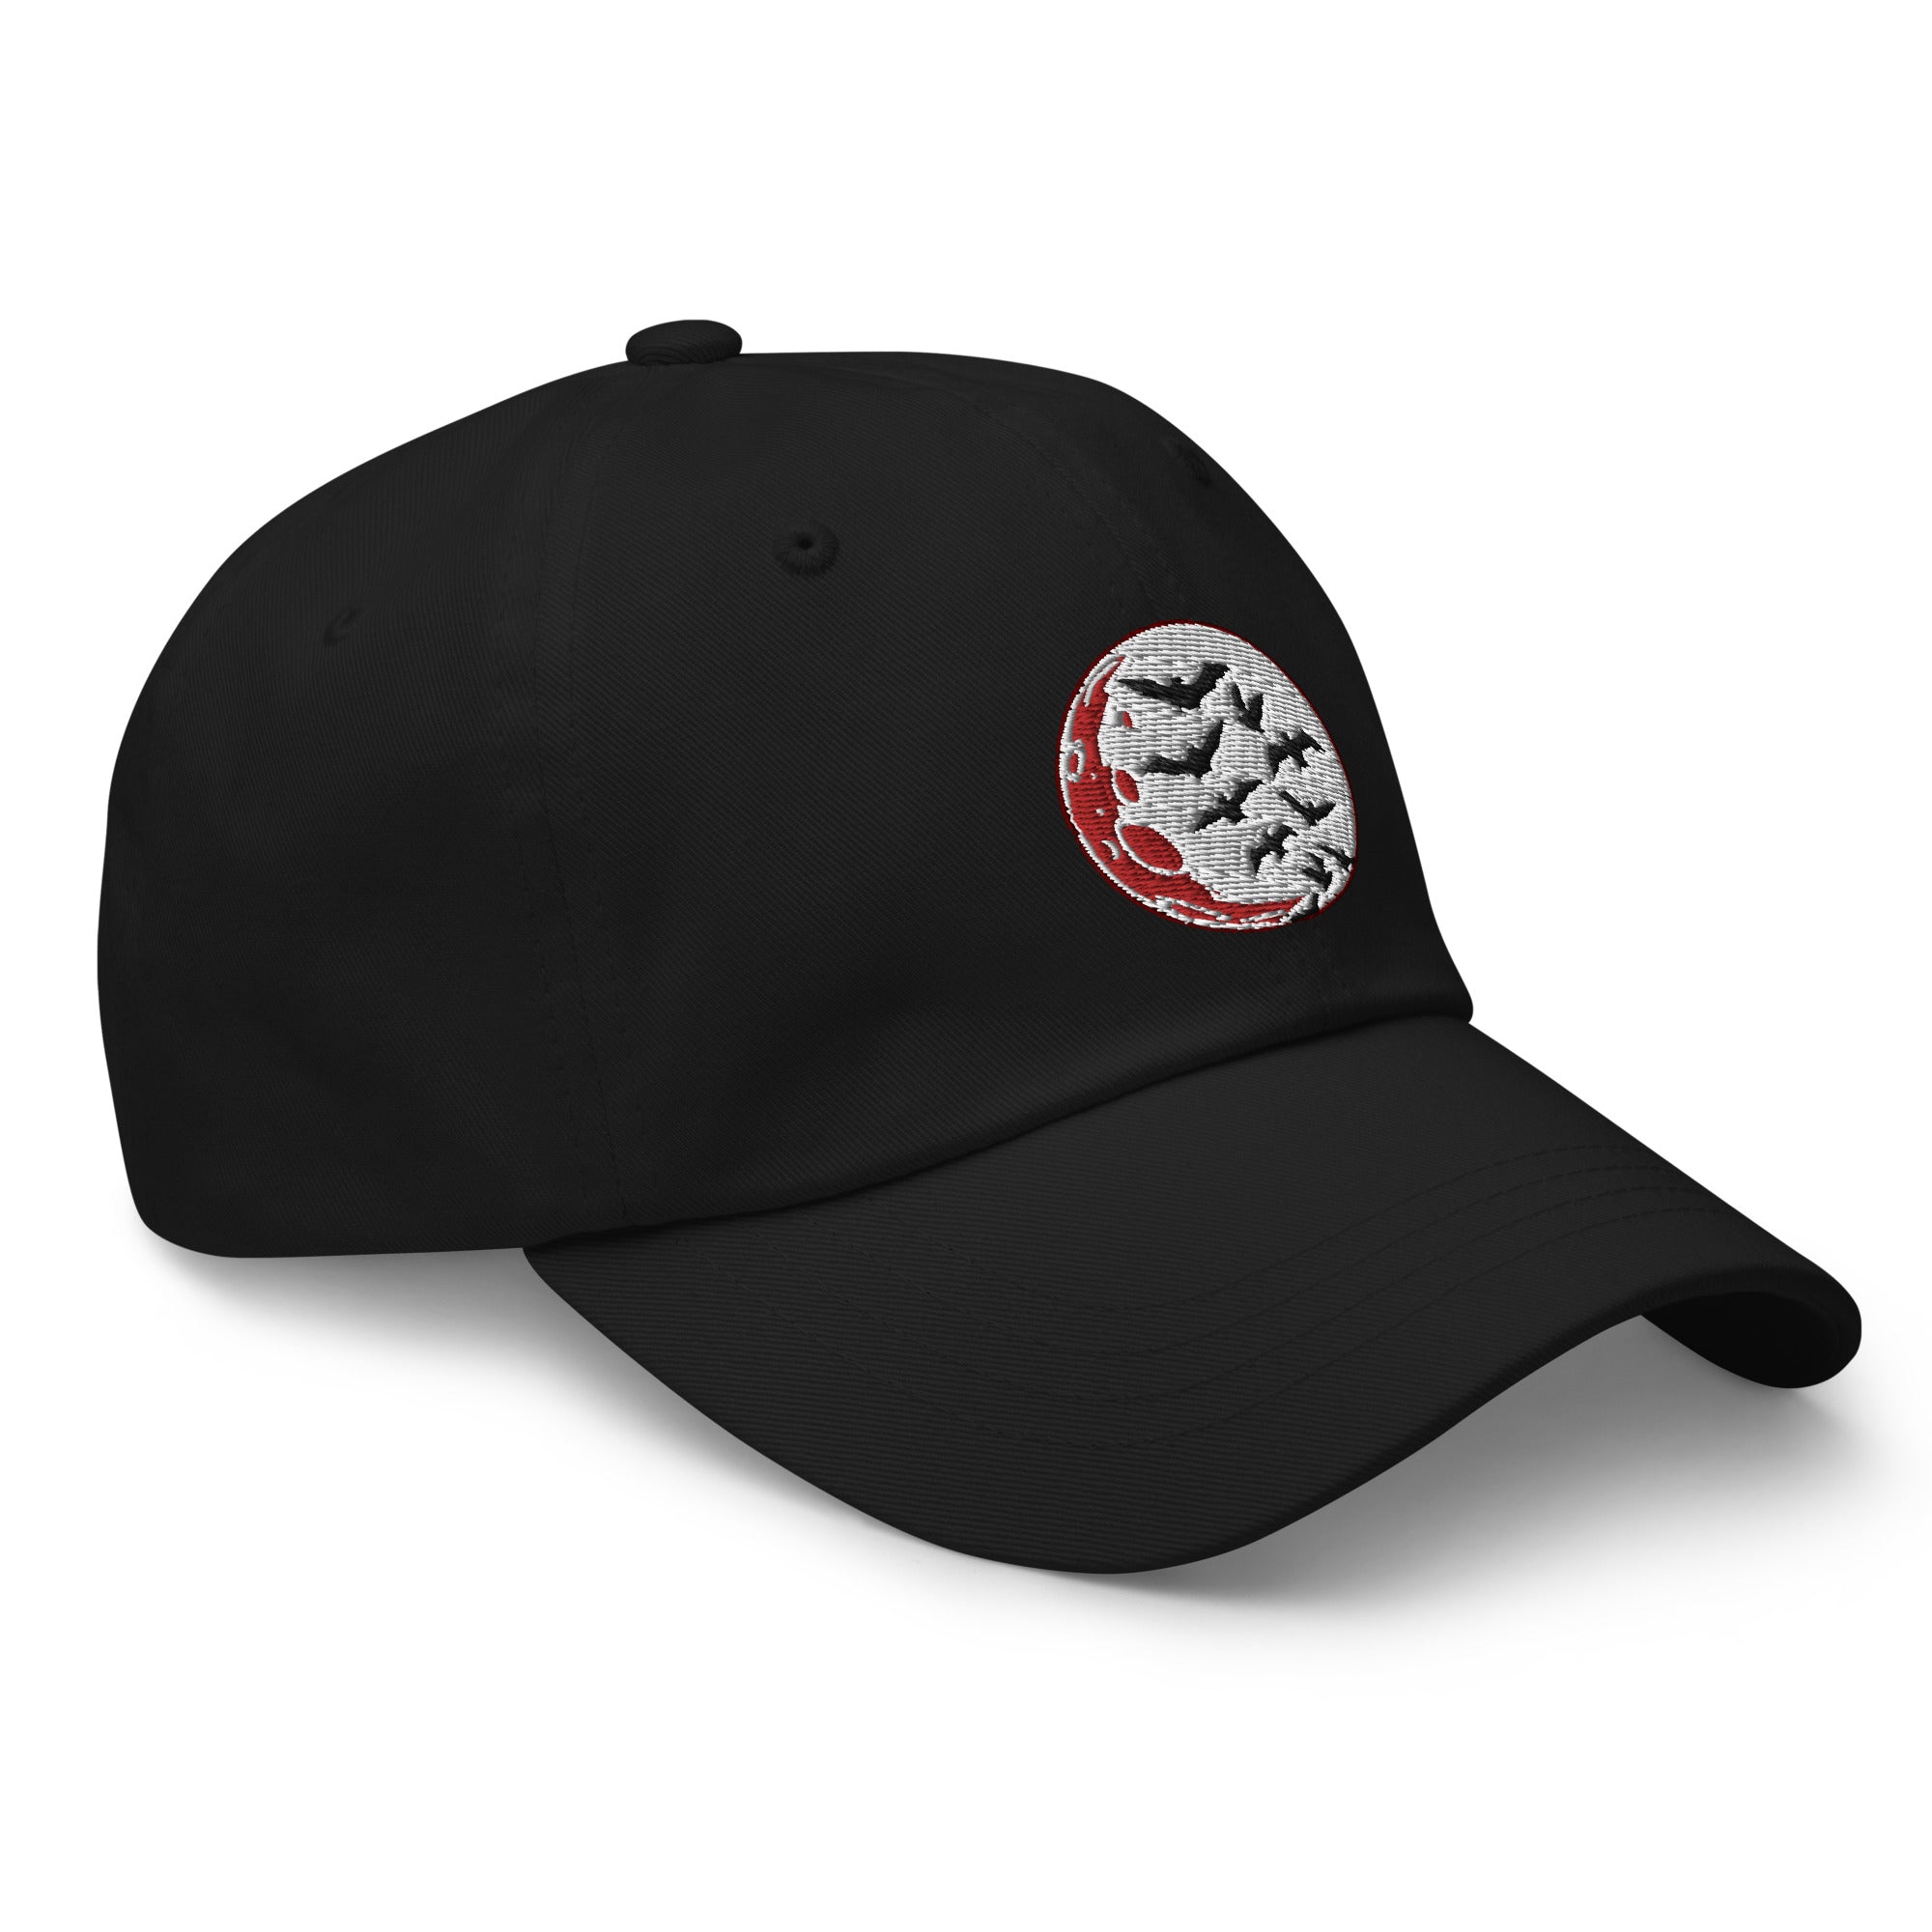 Flying Bats over Blood Moon Embroidered Baseball Cap Dad hat - Edge of Life Designs